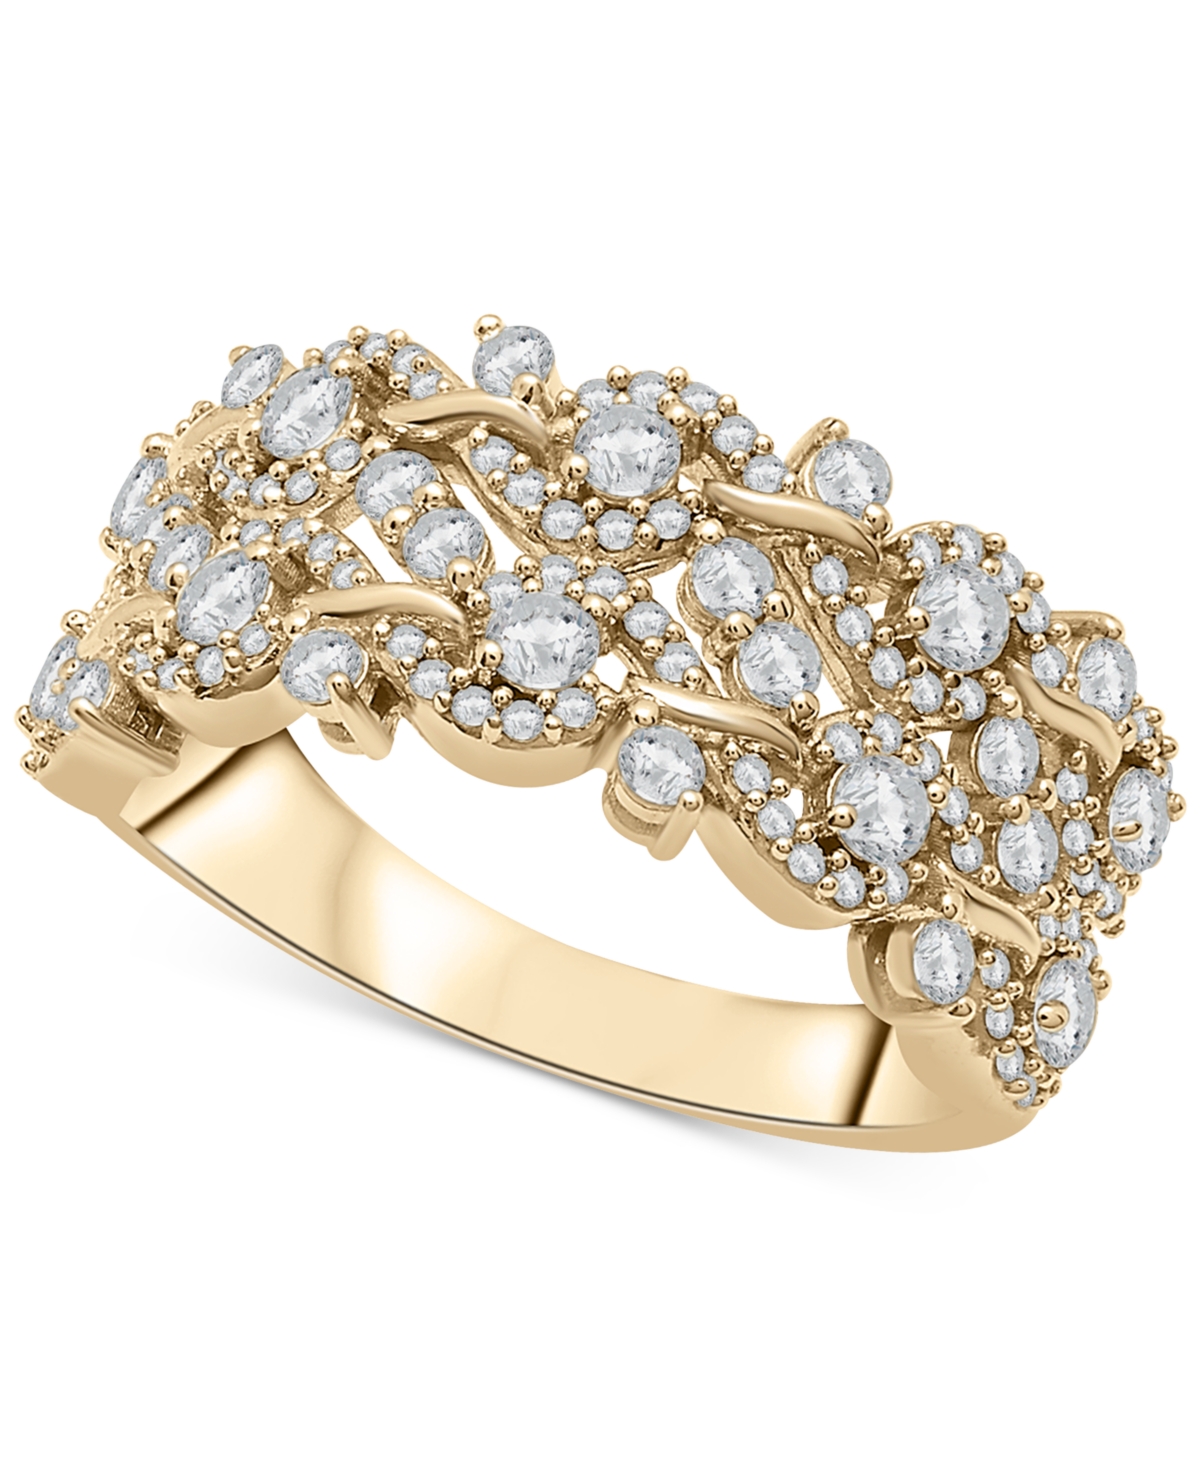 Diamond Swirl Cluster Statement Ring (1 ct. t.w.) in 14k Gold, Created for Macy's - Yellow Gold